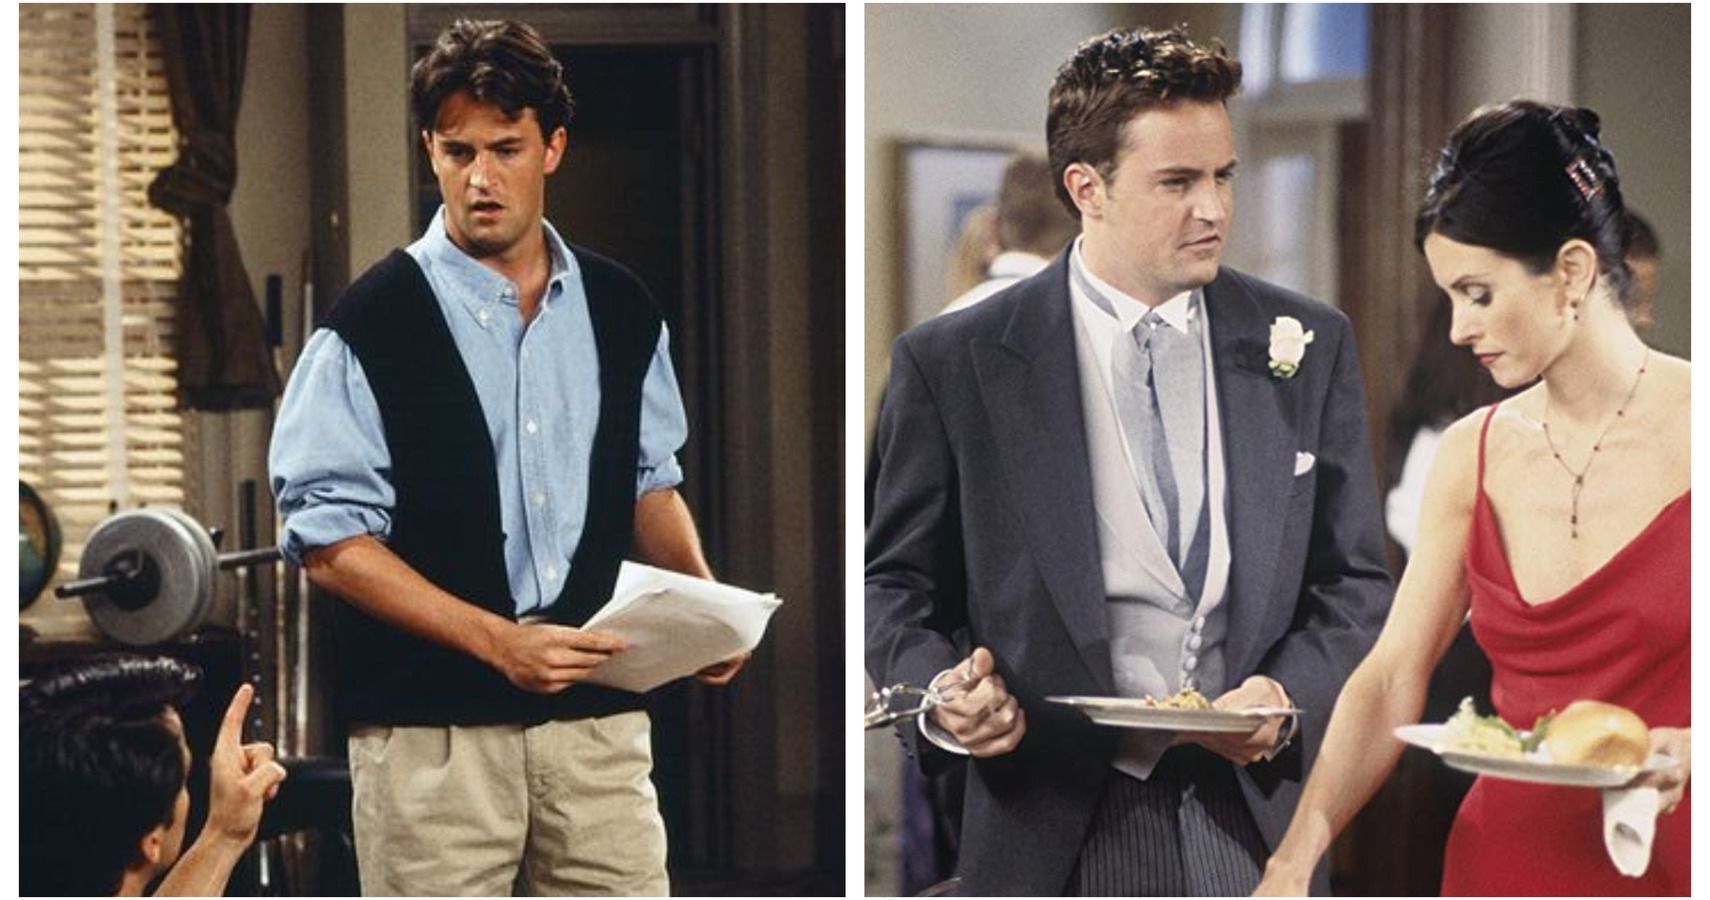 Friends: Chandler’s 5 Best Outfits (& 5 Worst) .